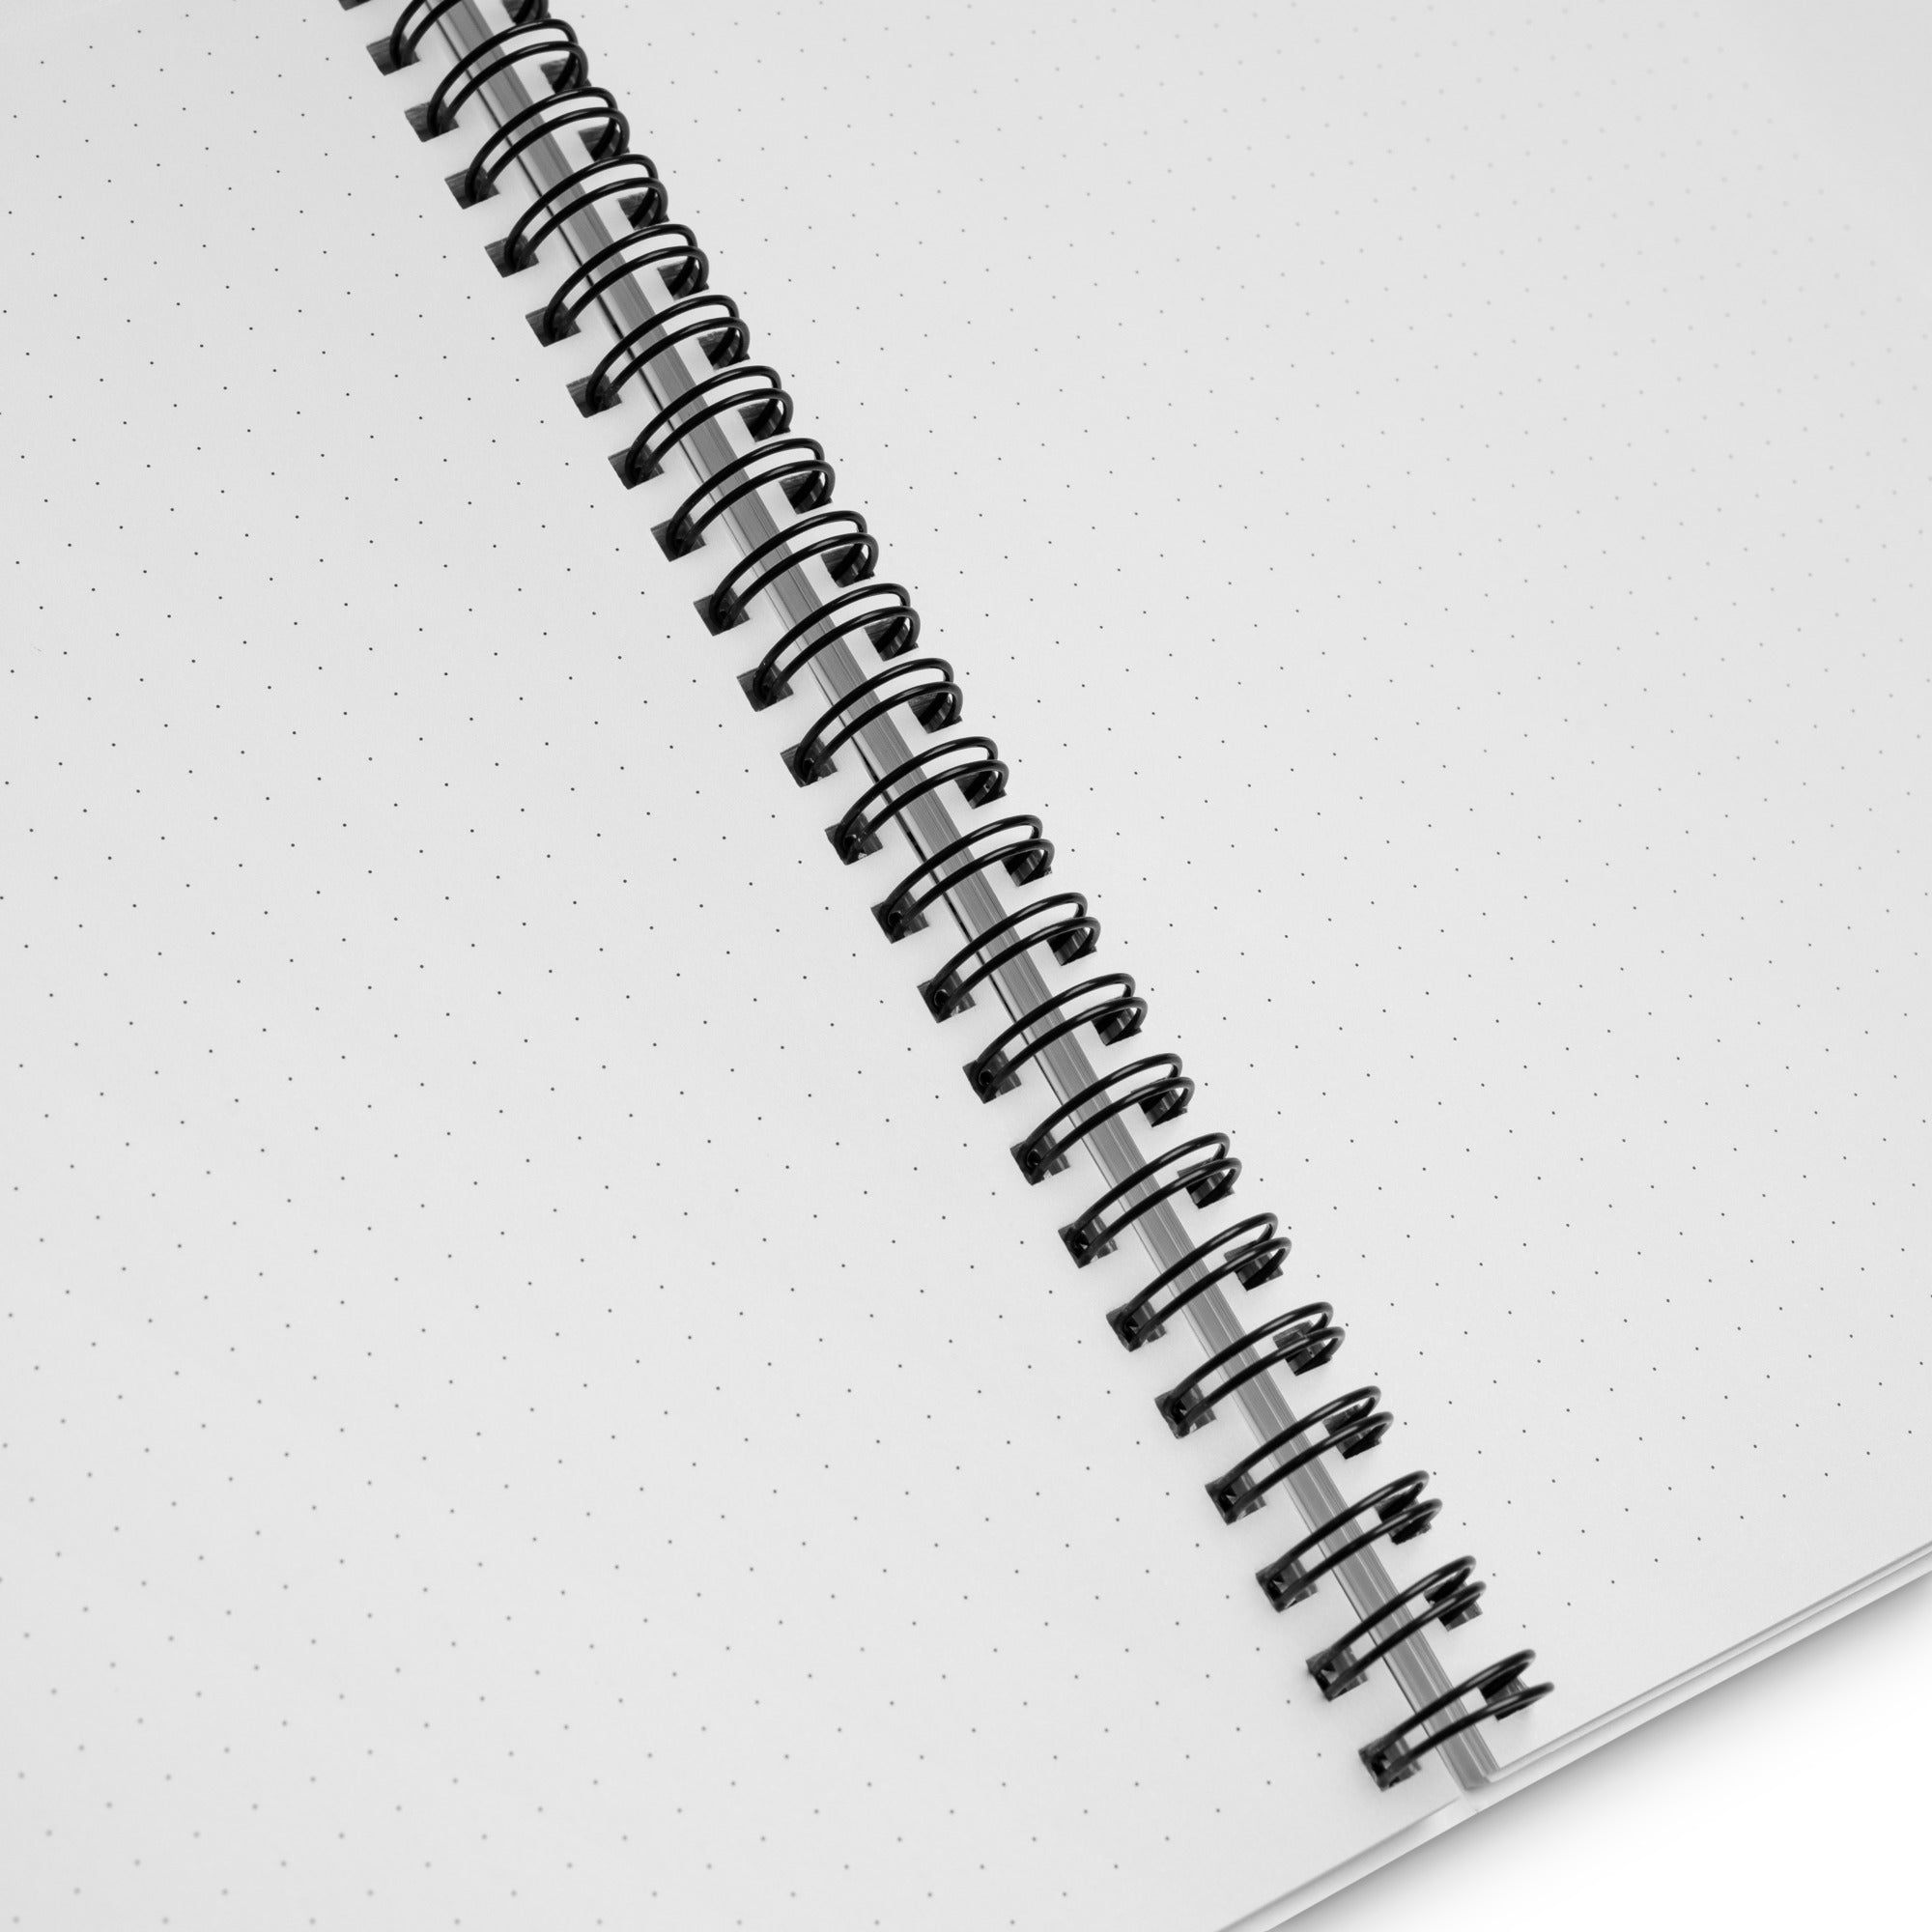 It's a Great Day Notebook